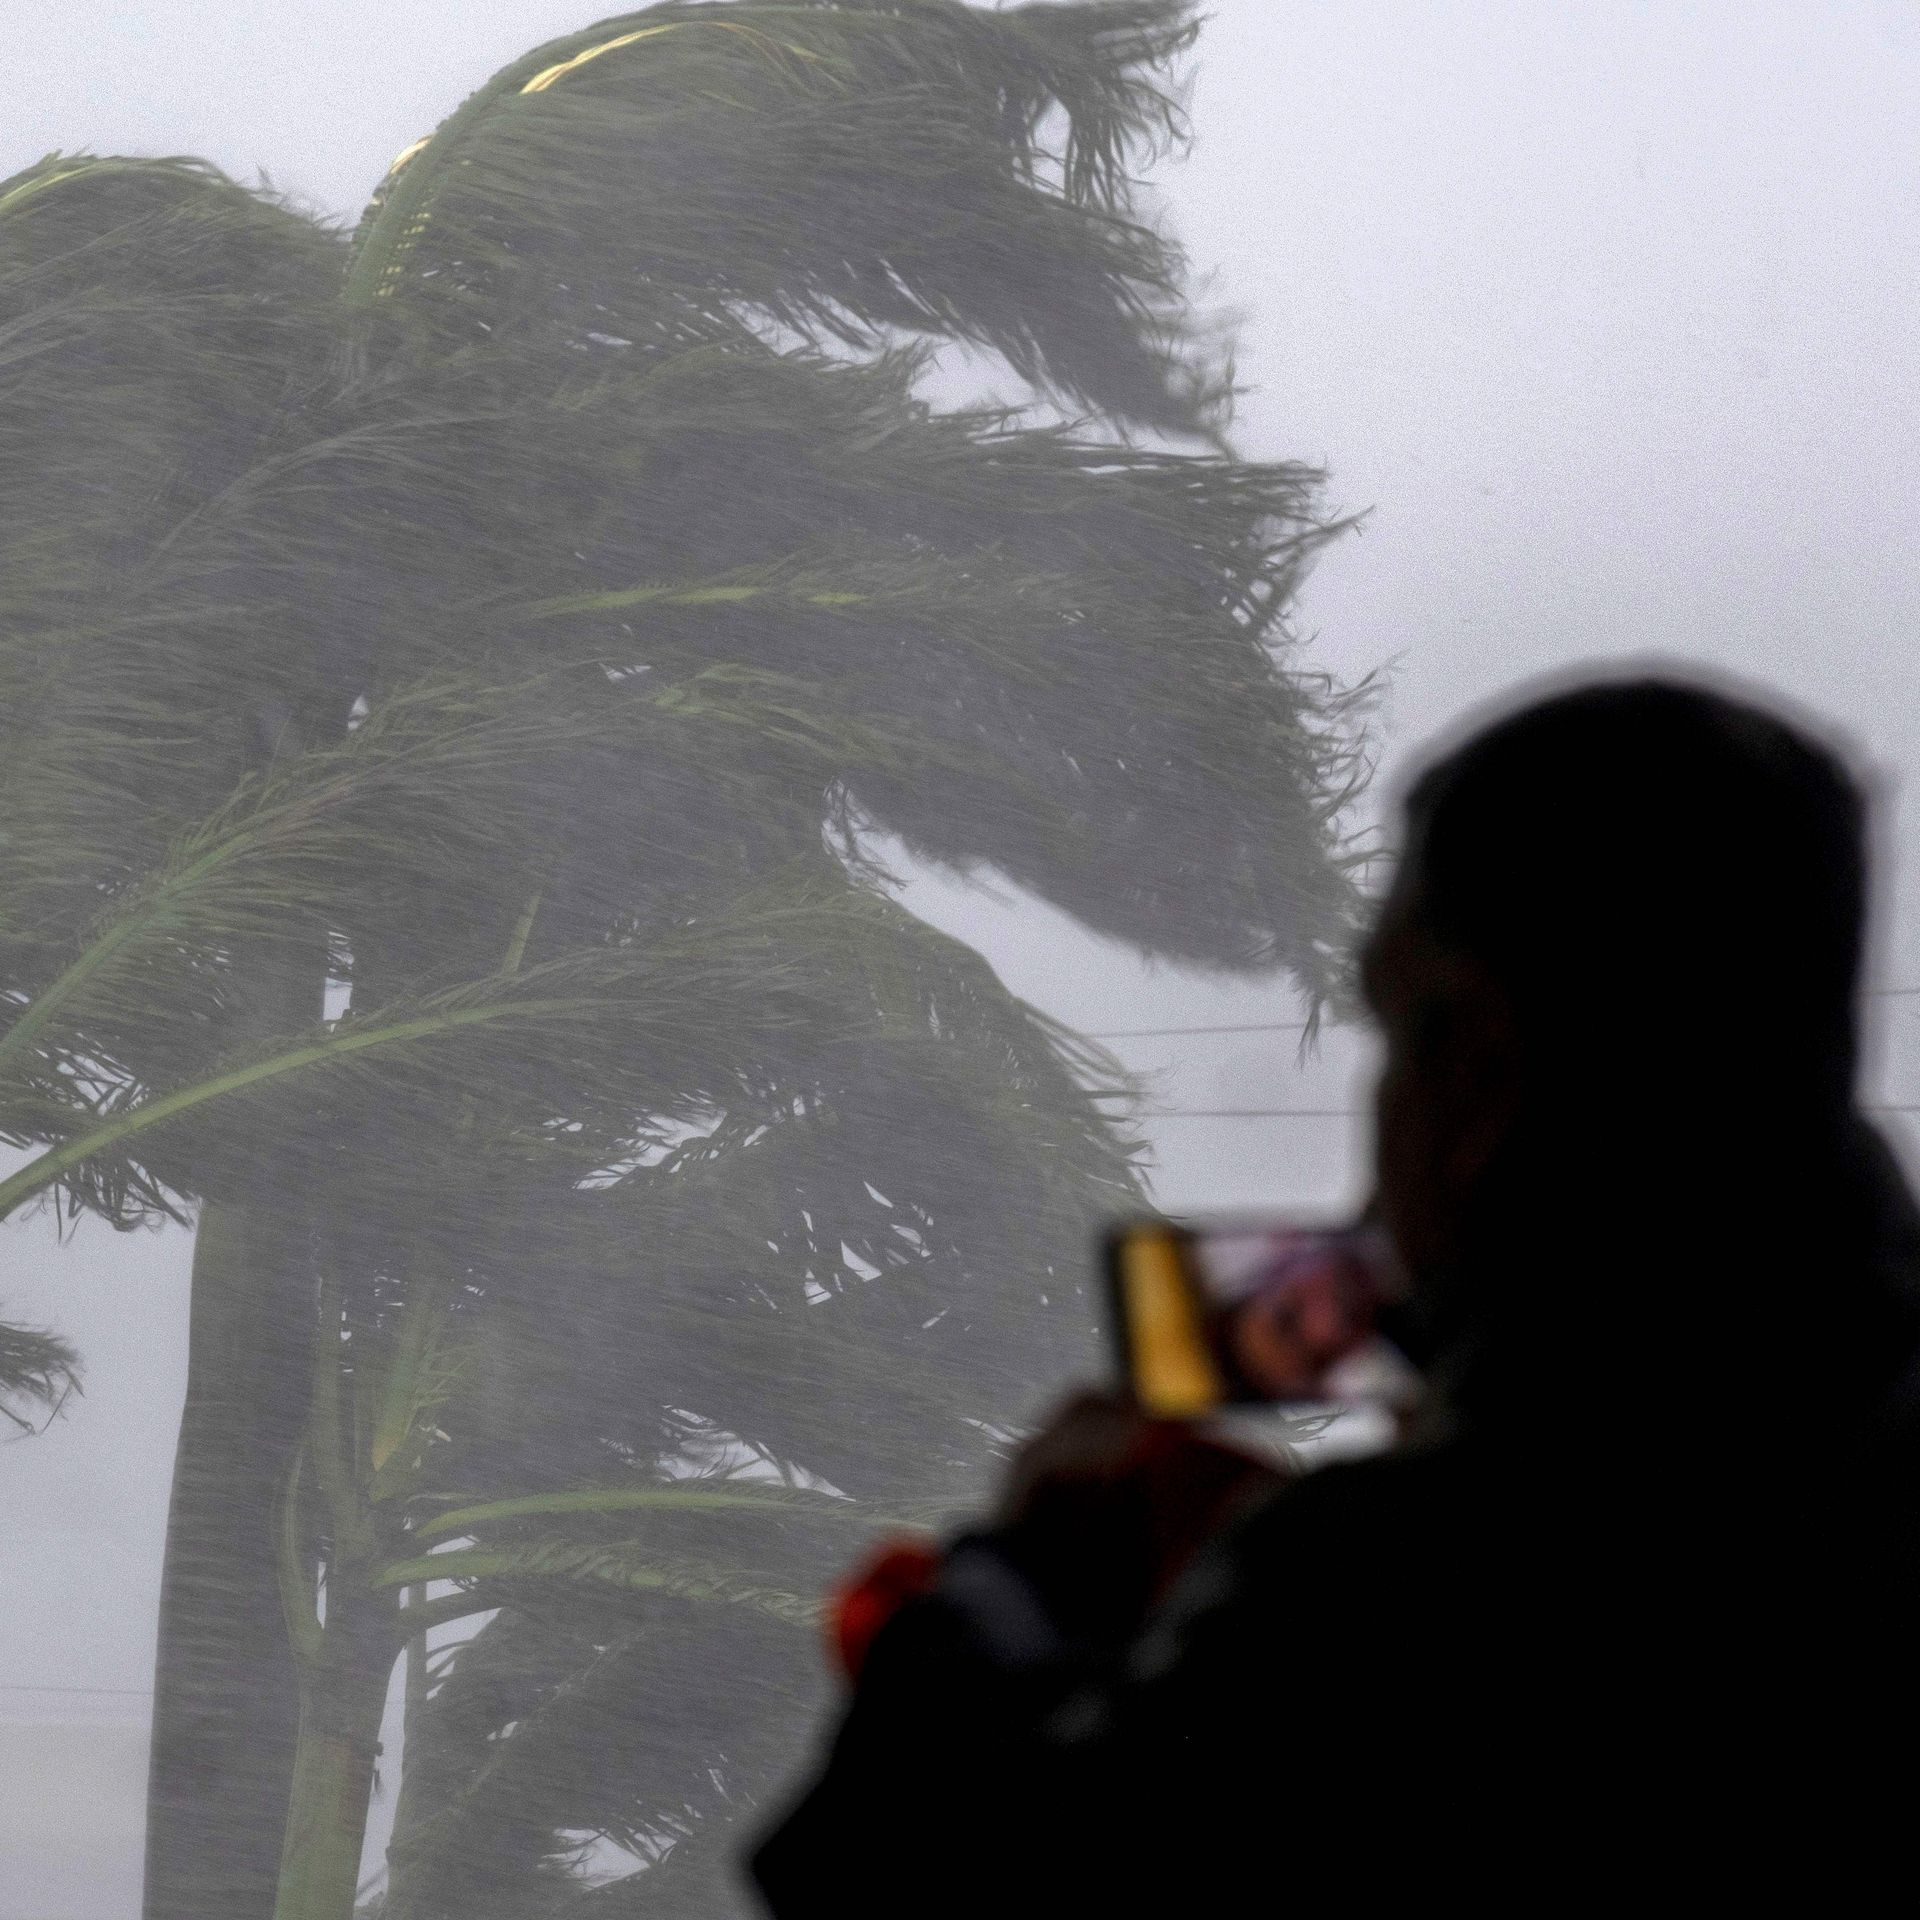 The silhouette of a person films Hurricane Ian outside on their phone.